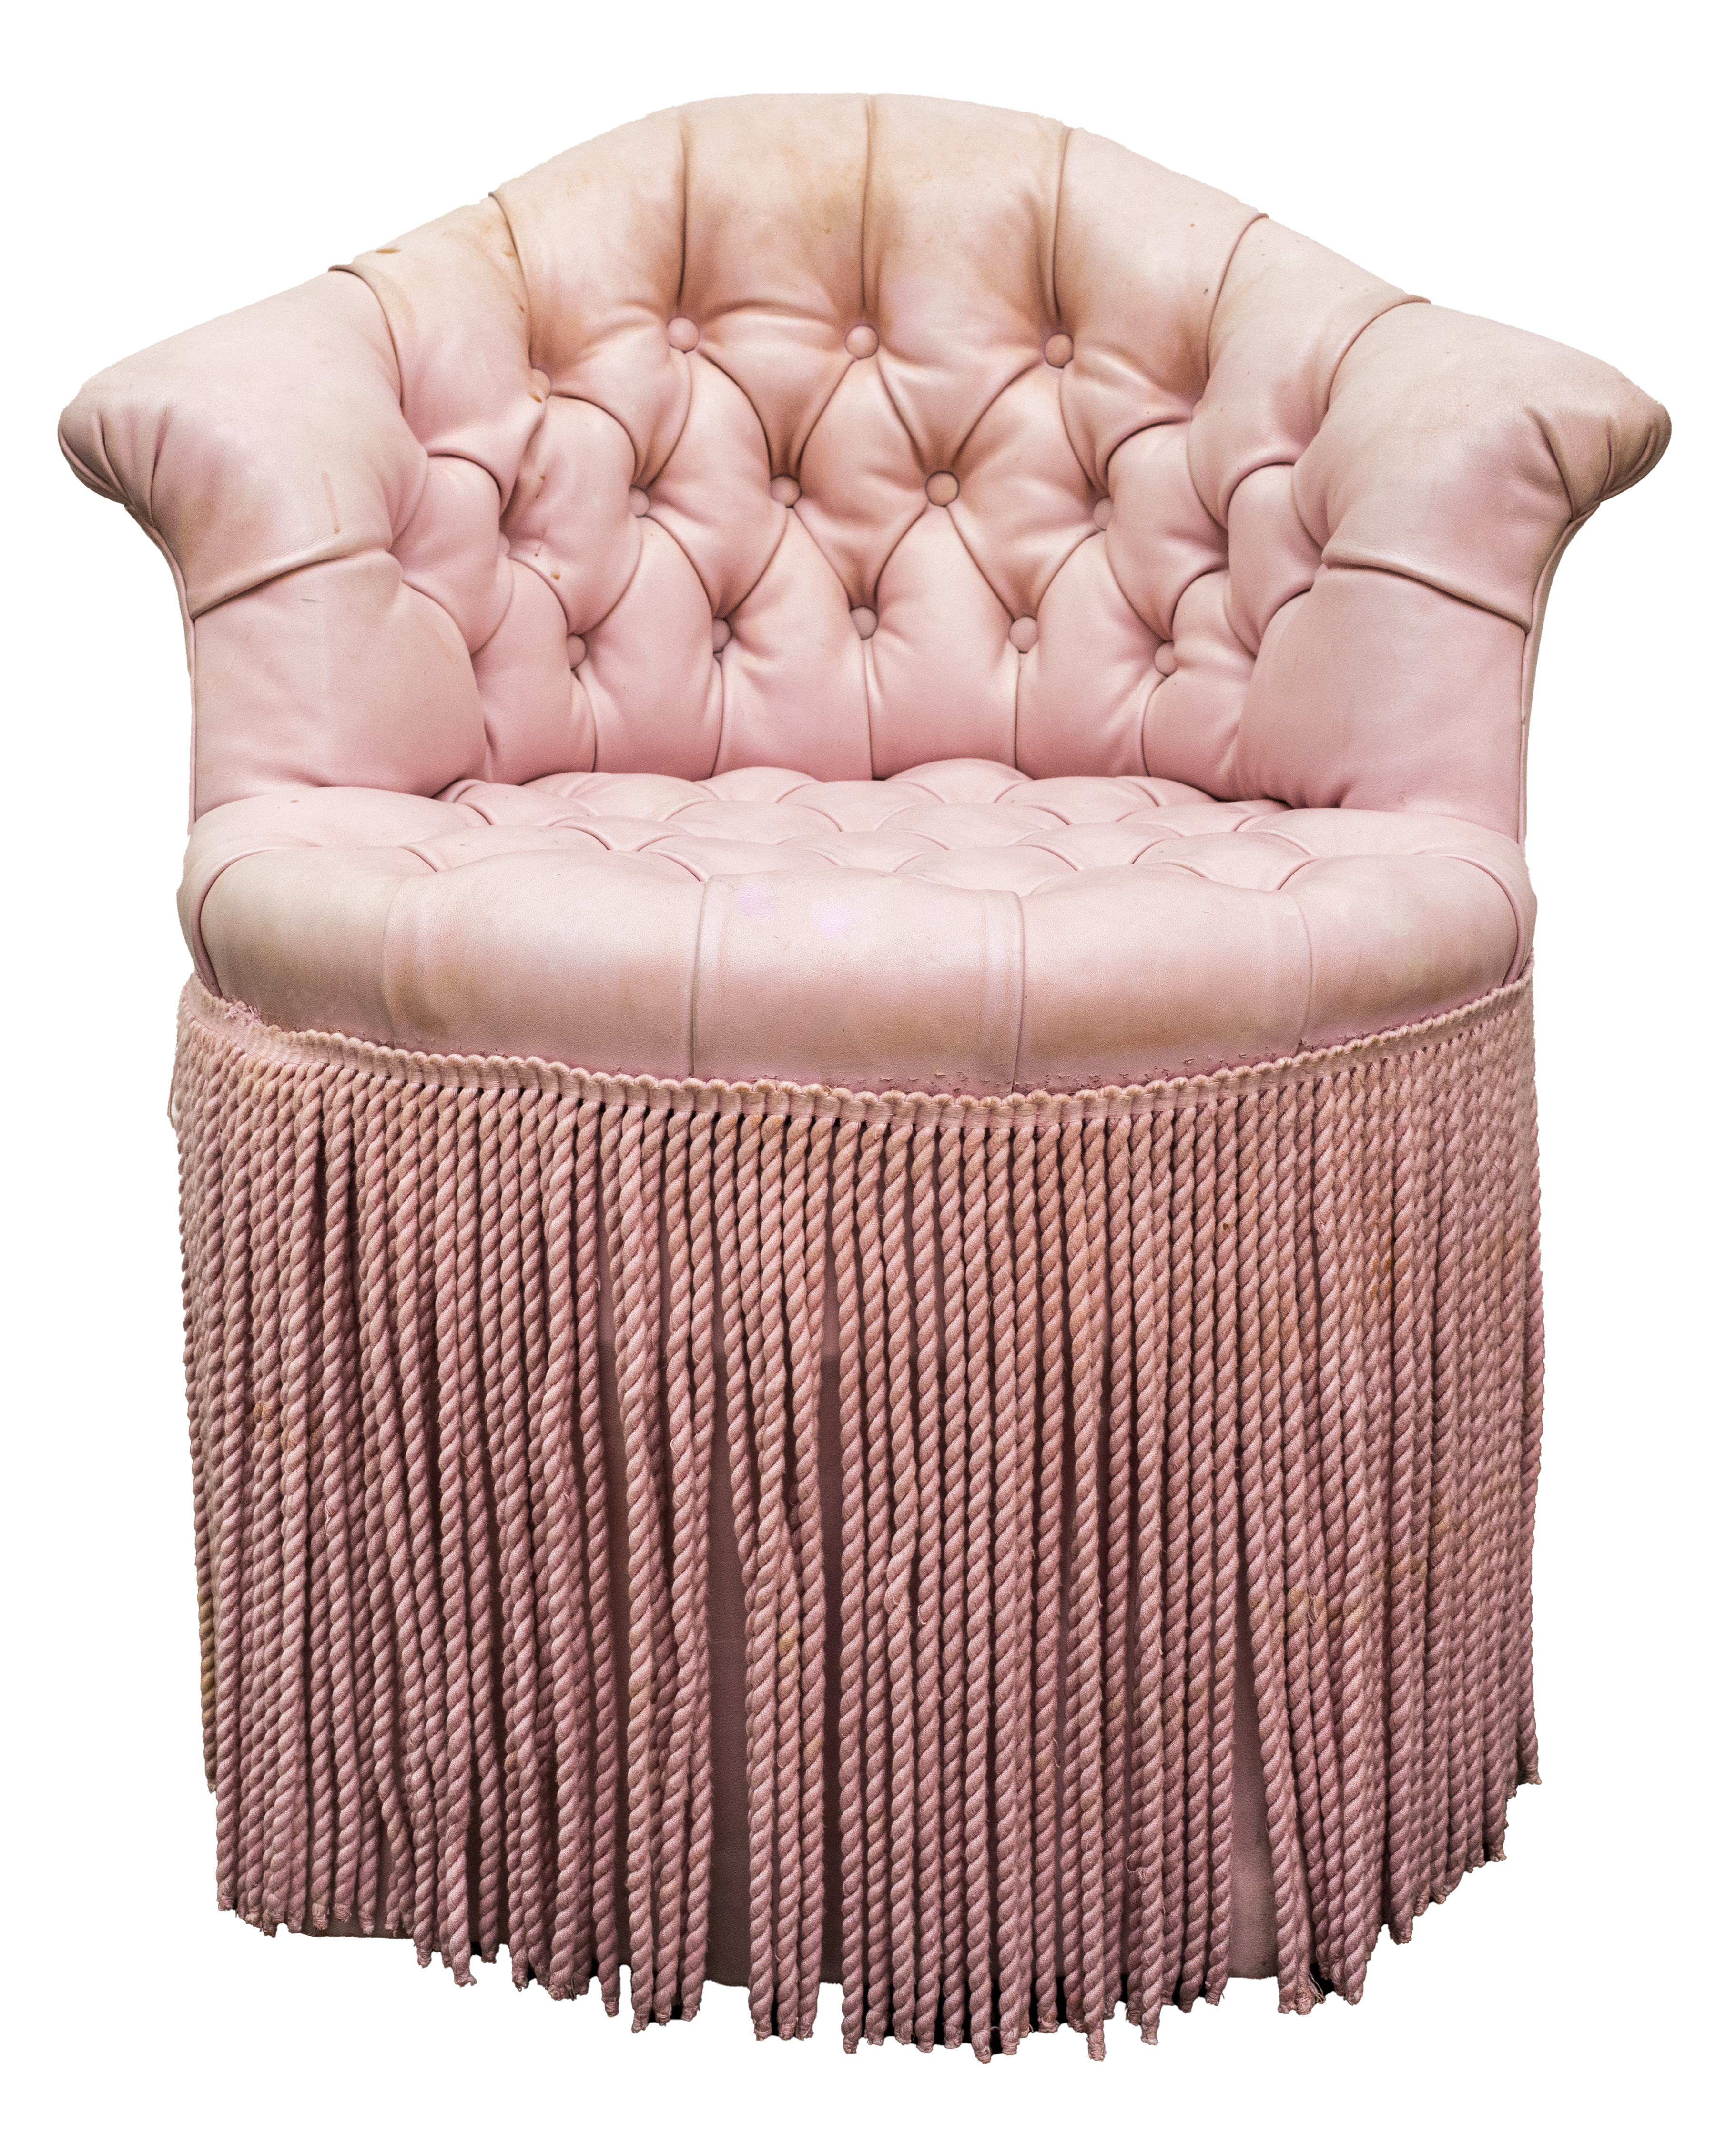 PINK UPHOLSTERED MAQUILLEUSE BOUDOIR 2d27a5